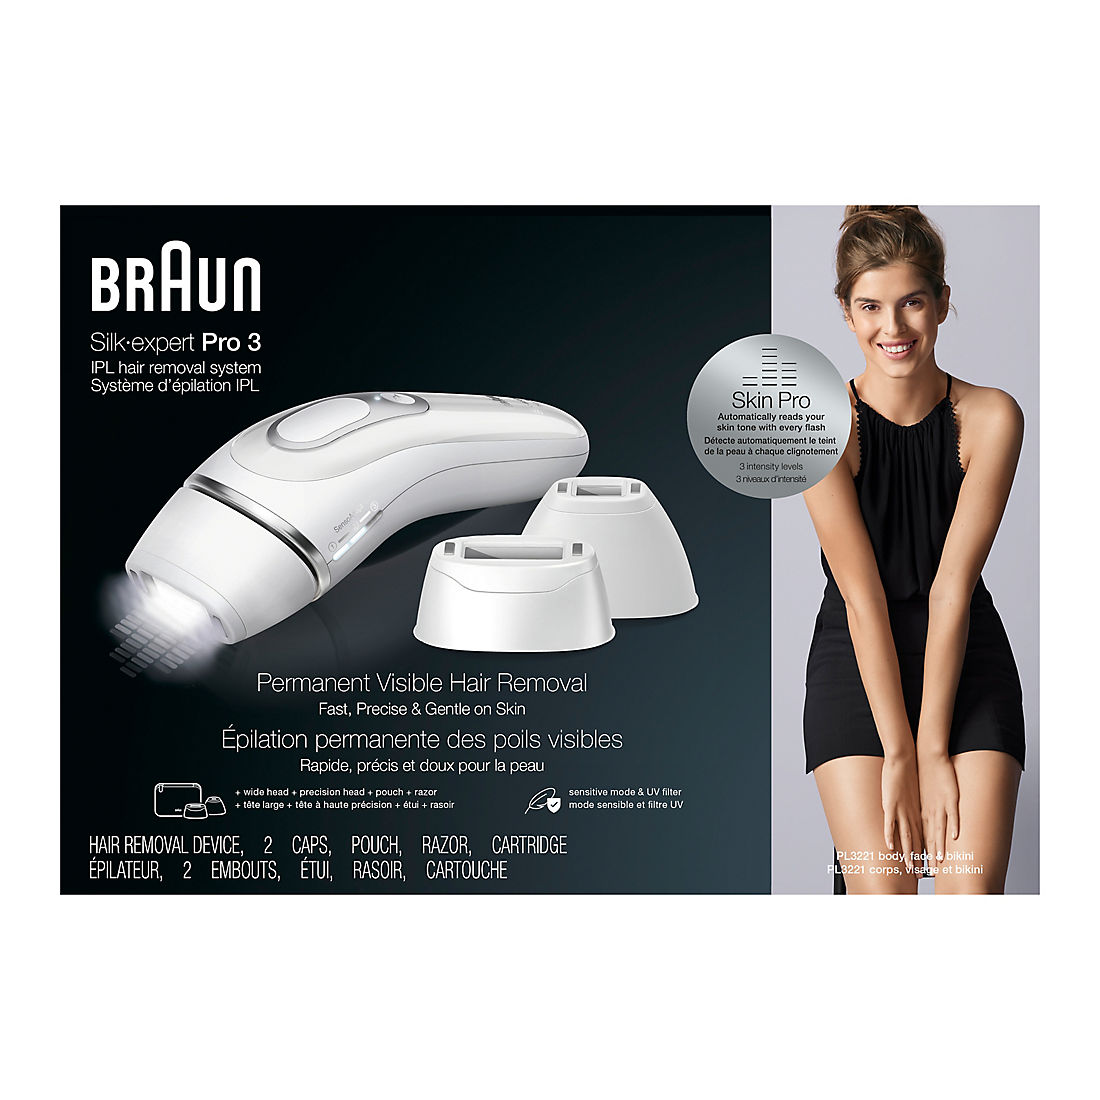 Braun Silk Expert Pro 3 IPL At-Home Hair Removal System for Men and Women